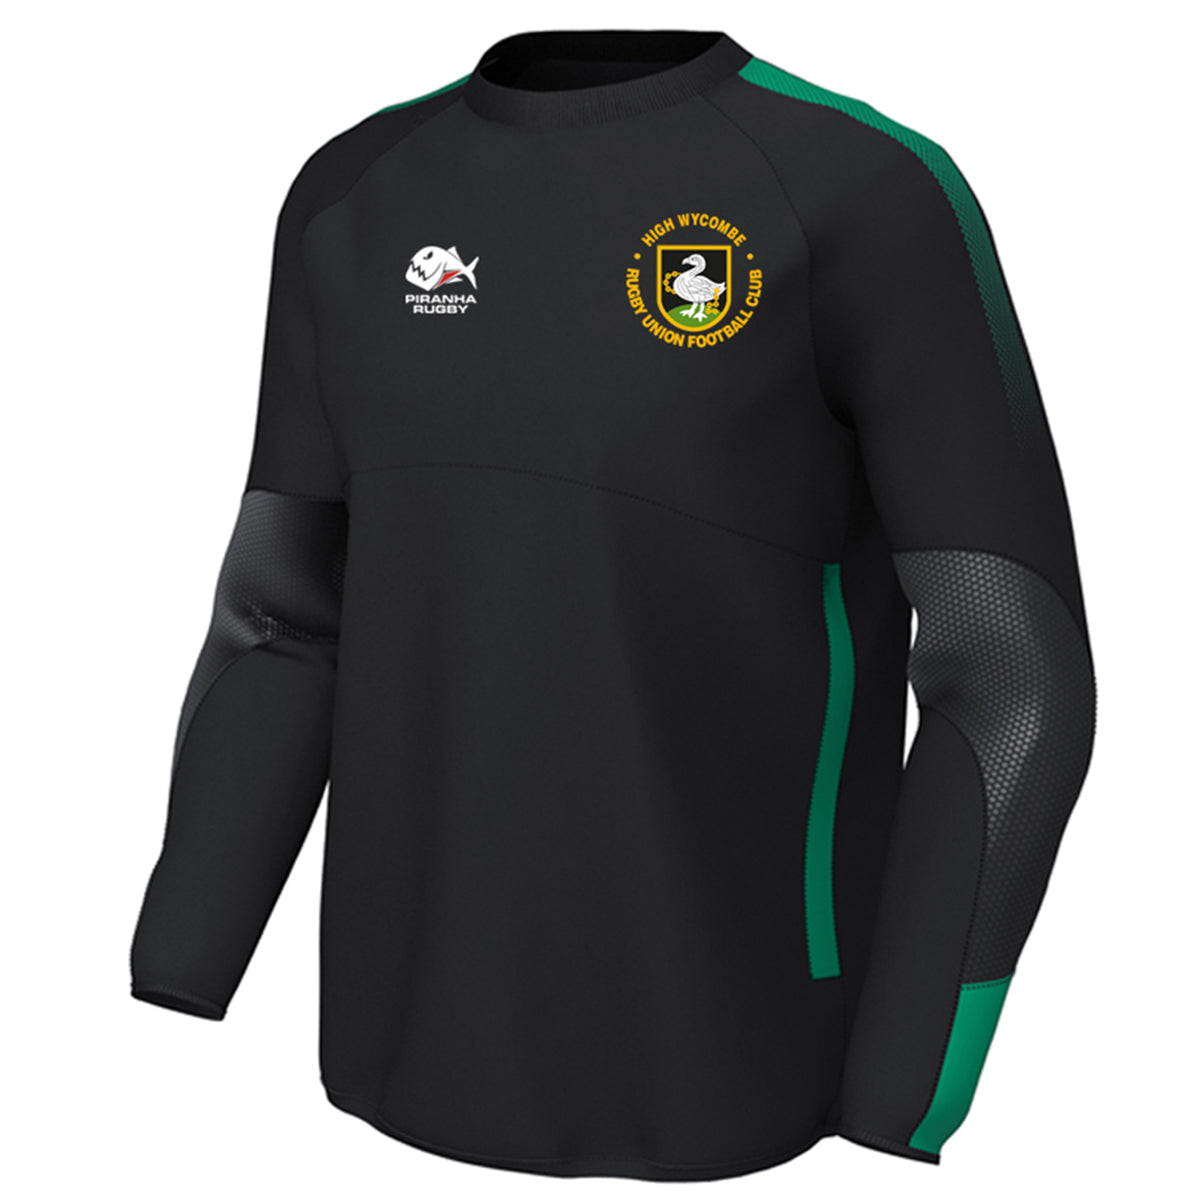 High Wycombe RFC Edge Pro Contact Top